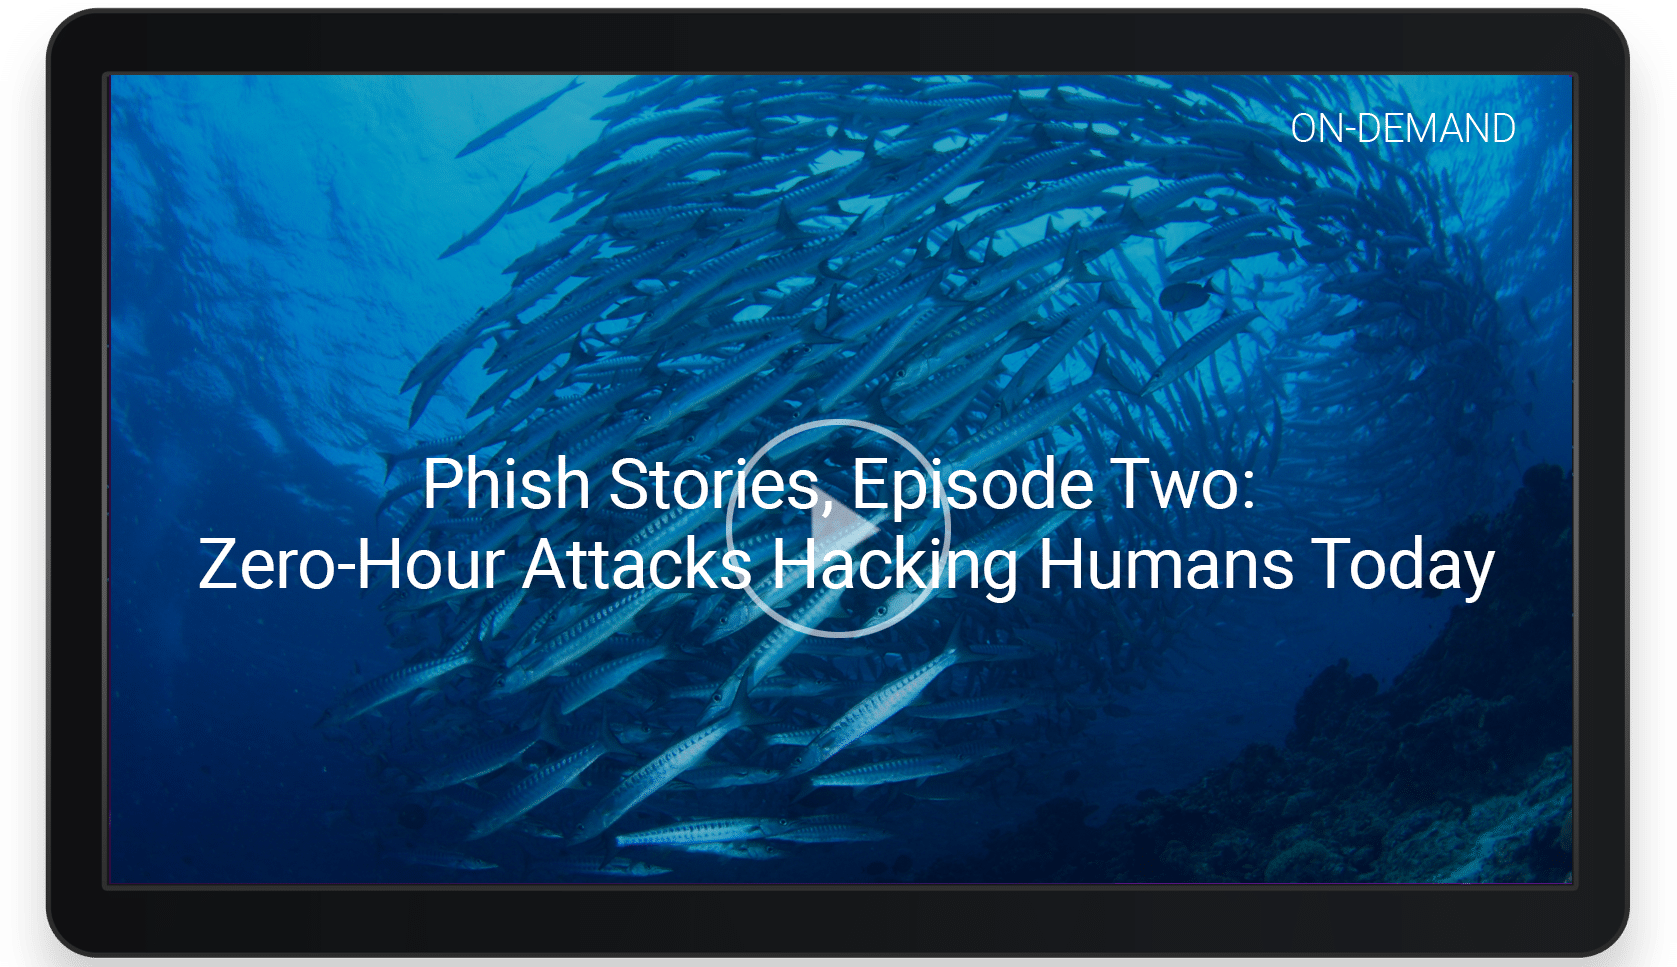 Phish Stories Episode Two